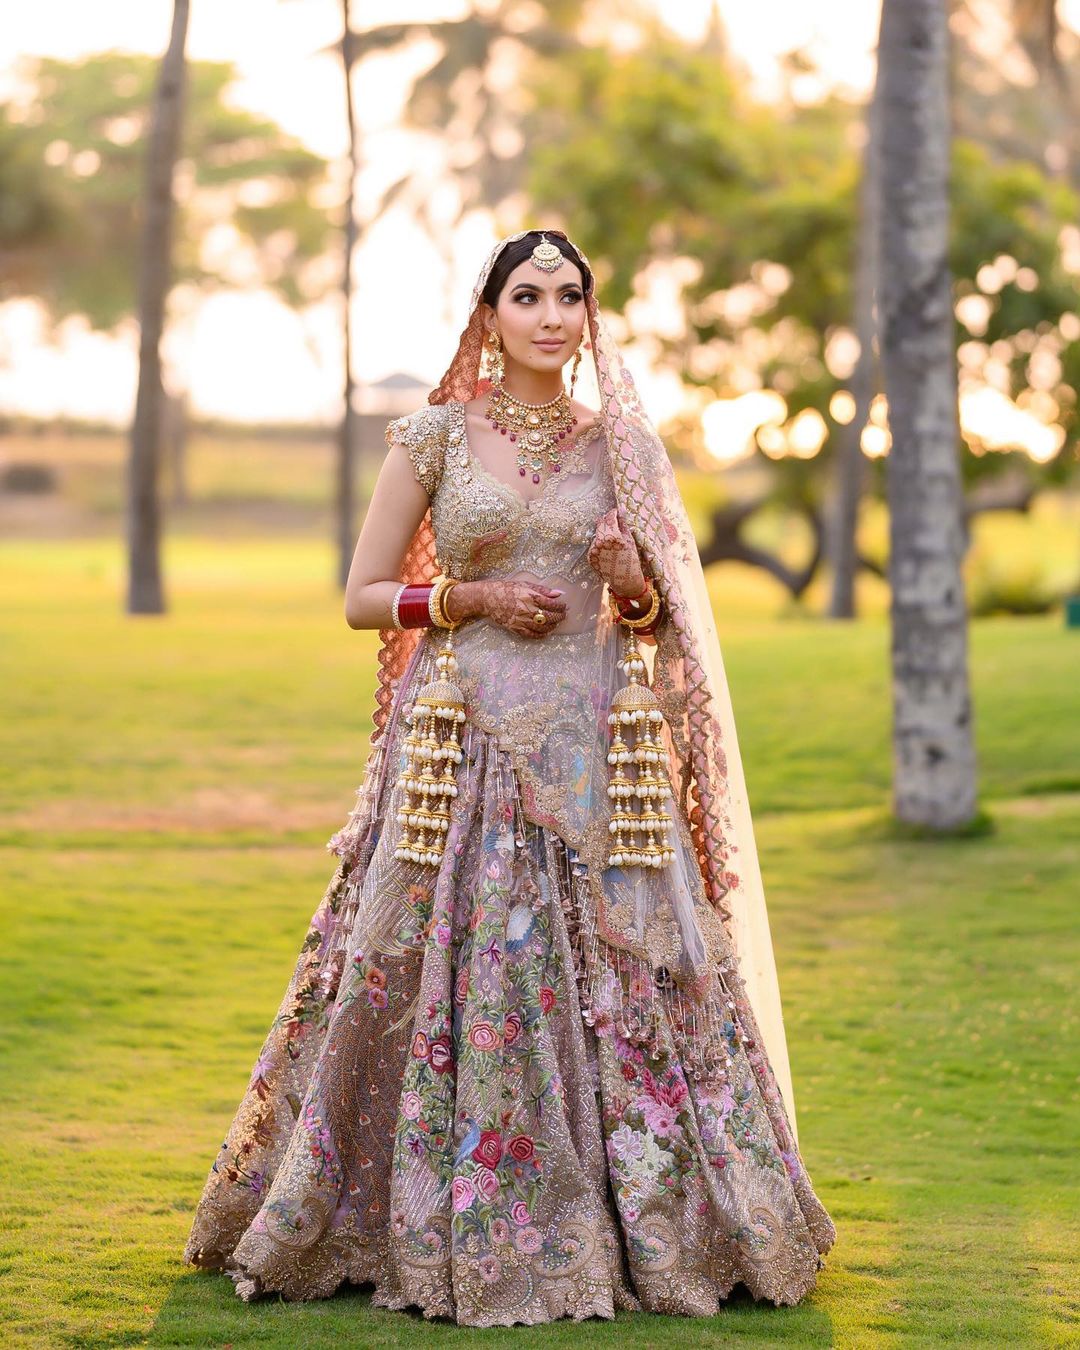 Buy Royal Golden Embroidered Bridal Lehenga | Q by Sonia